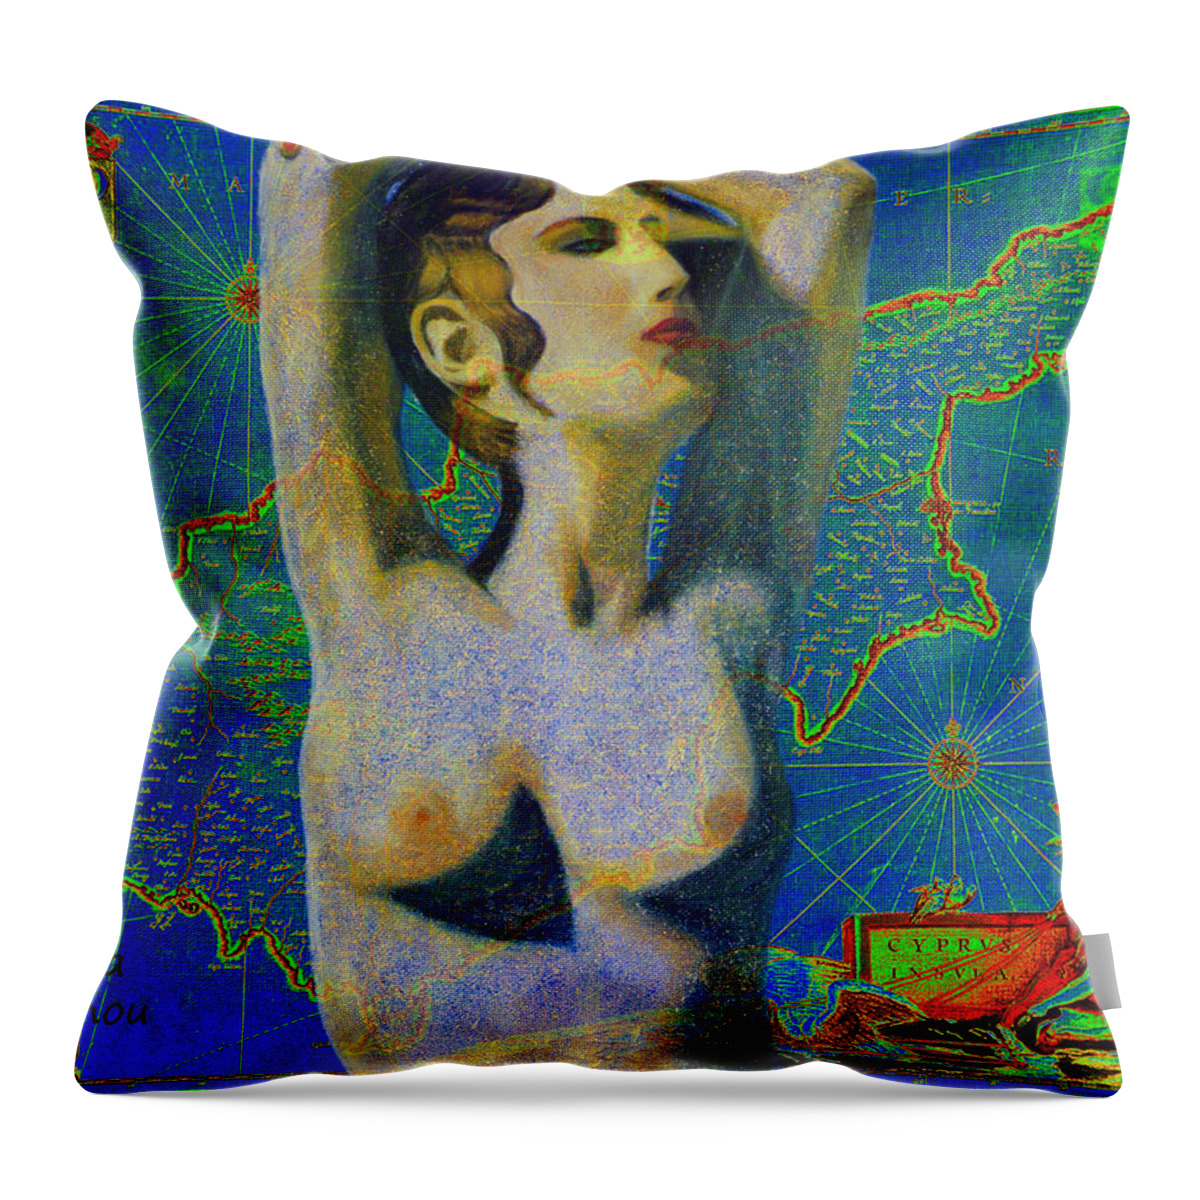 Augusta Stylianou Throw Pillow featuring the digital art Ancient Cyprus Map and Aphrodite #11 by Augusta Stylianou